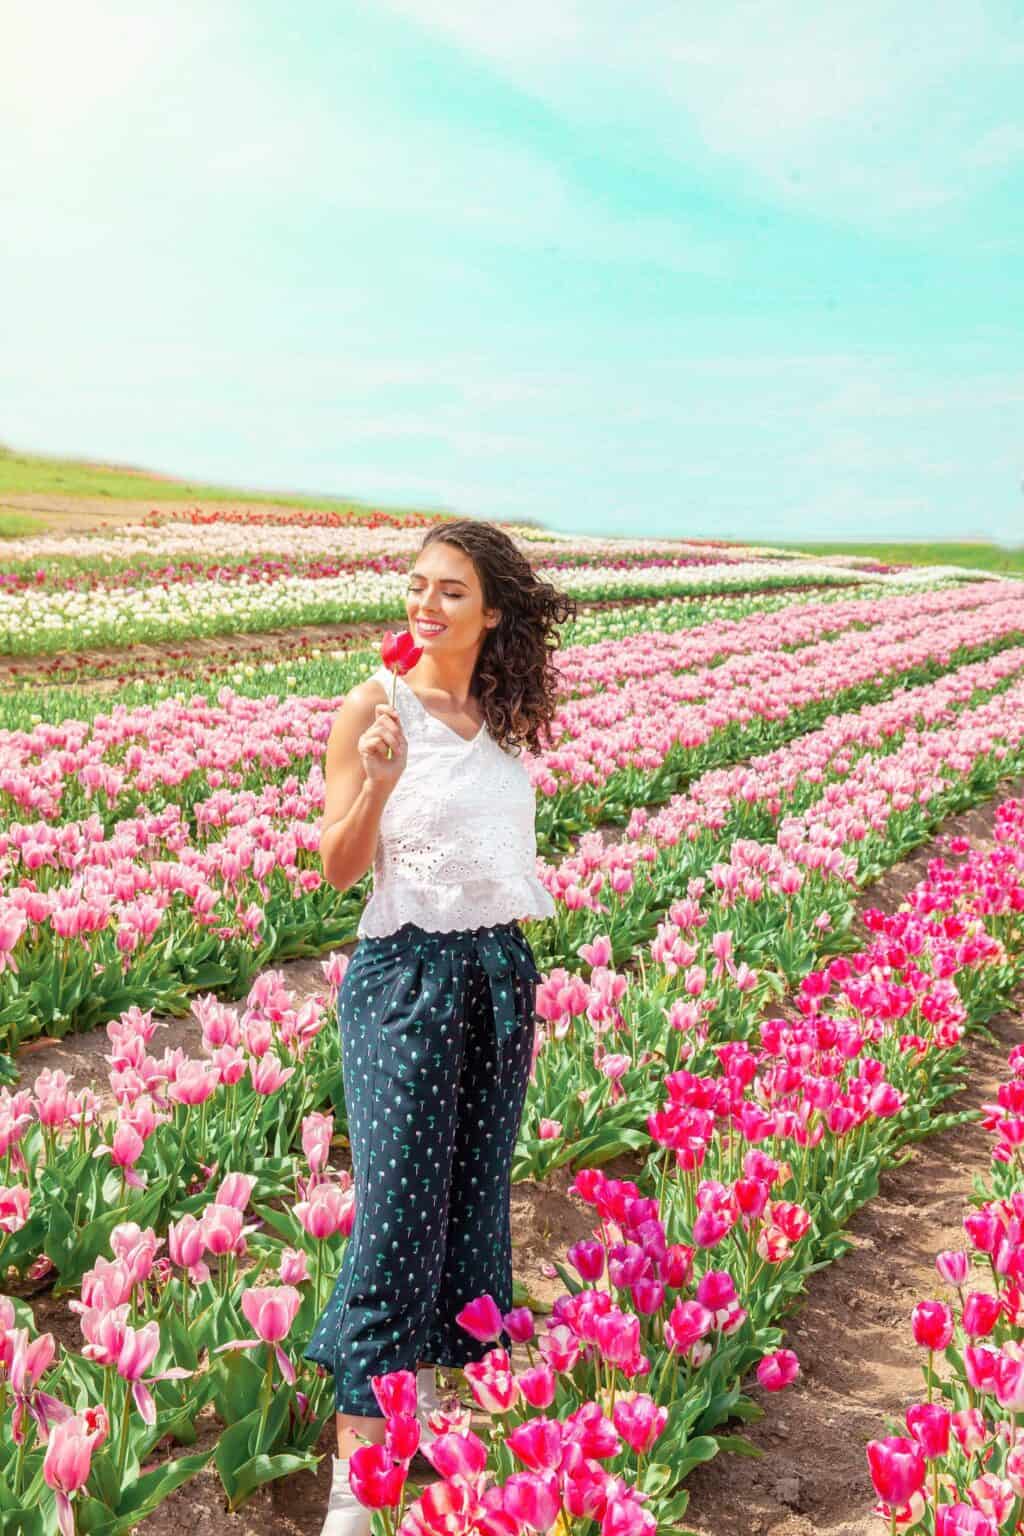 a woman standing in a field of pink and white flowers